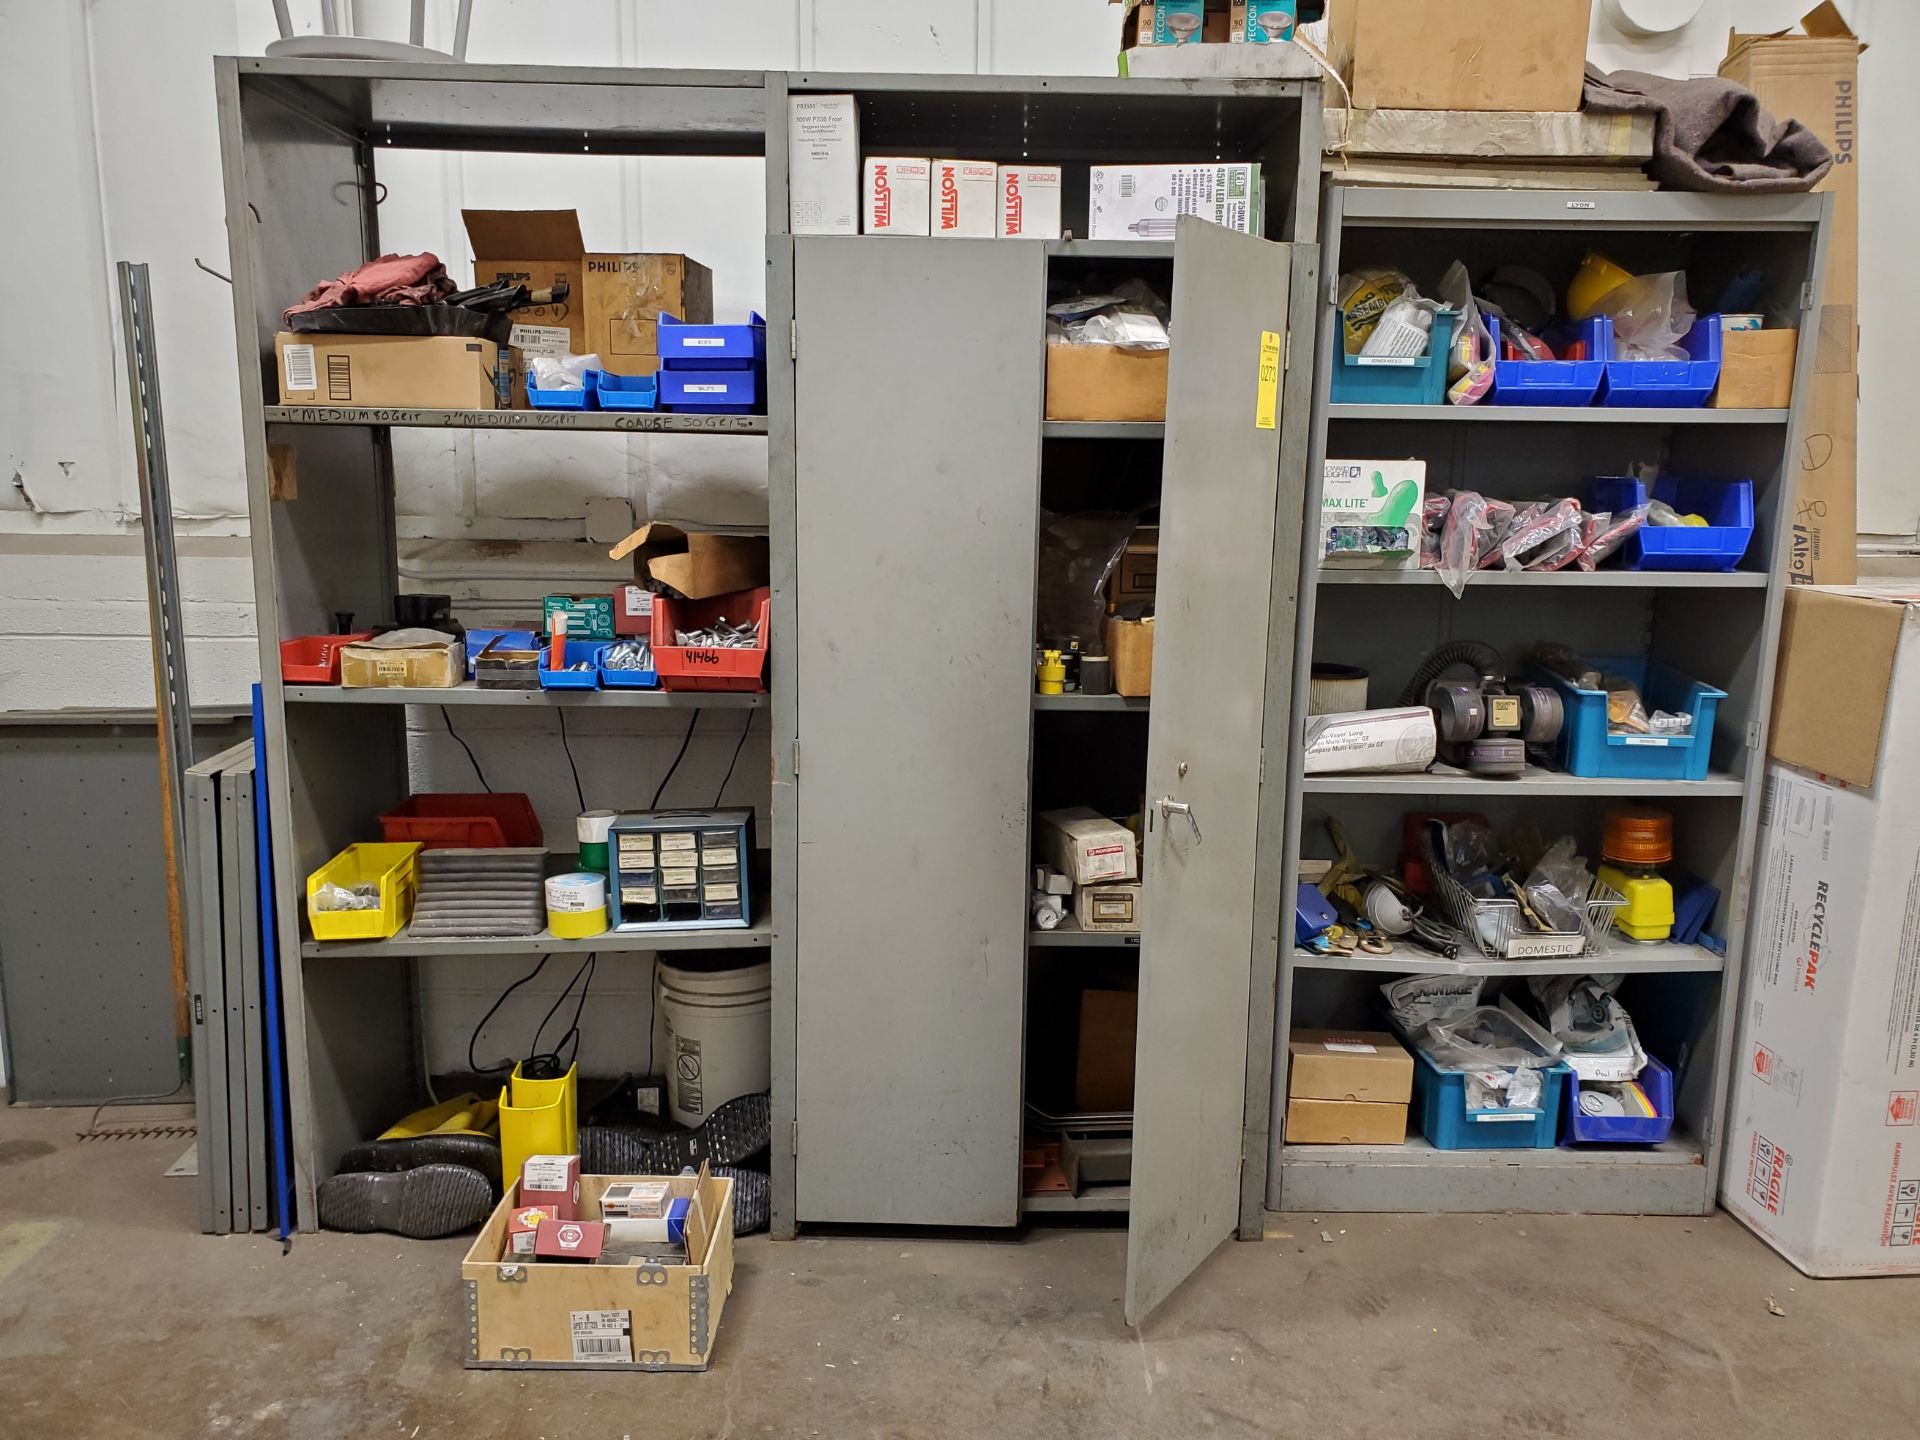 SHELVING UNIT W/ CONTENTS, RESPIRATOR, FILTERS, GLOVES, SAFETY STRAPS, MEDICAL WASTE BOX, BOOTS,